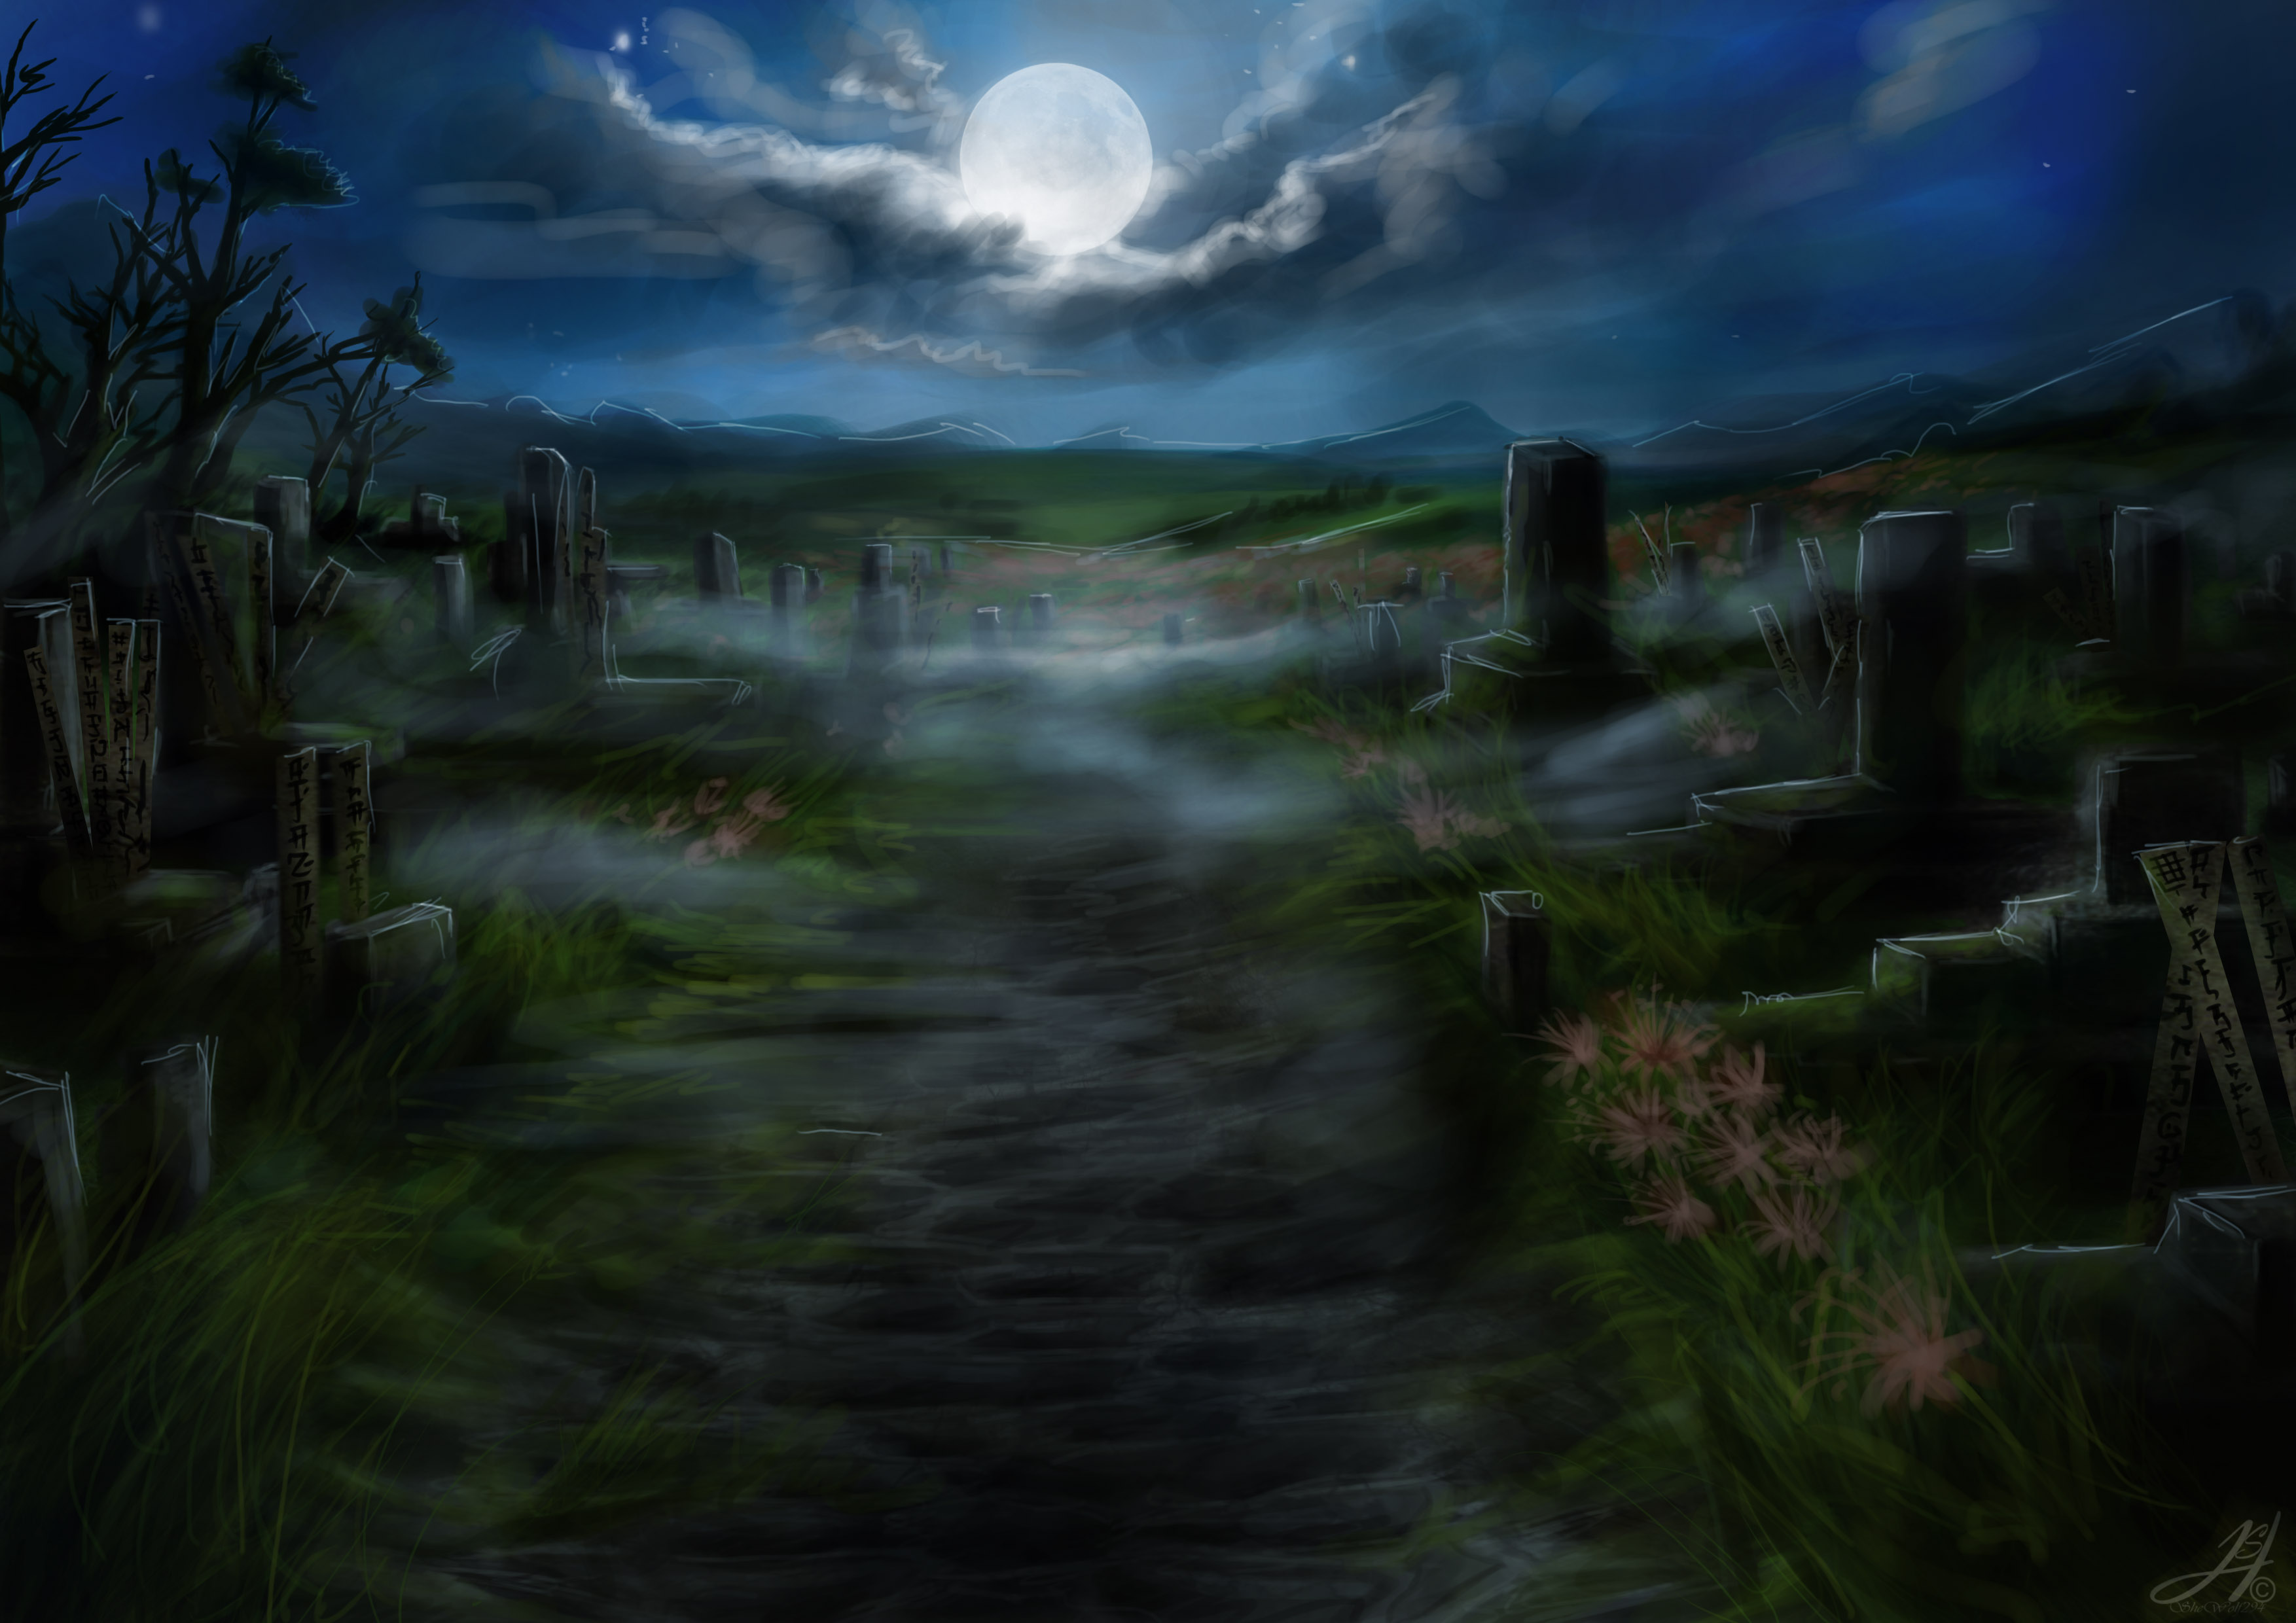 Dark Graveyard With Many Gravestones Lining The Edges Background Picture  Of Graveyards Background Image And Wallpaper for Free Download